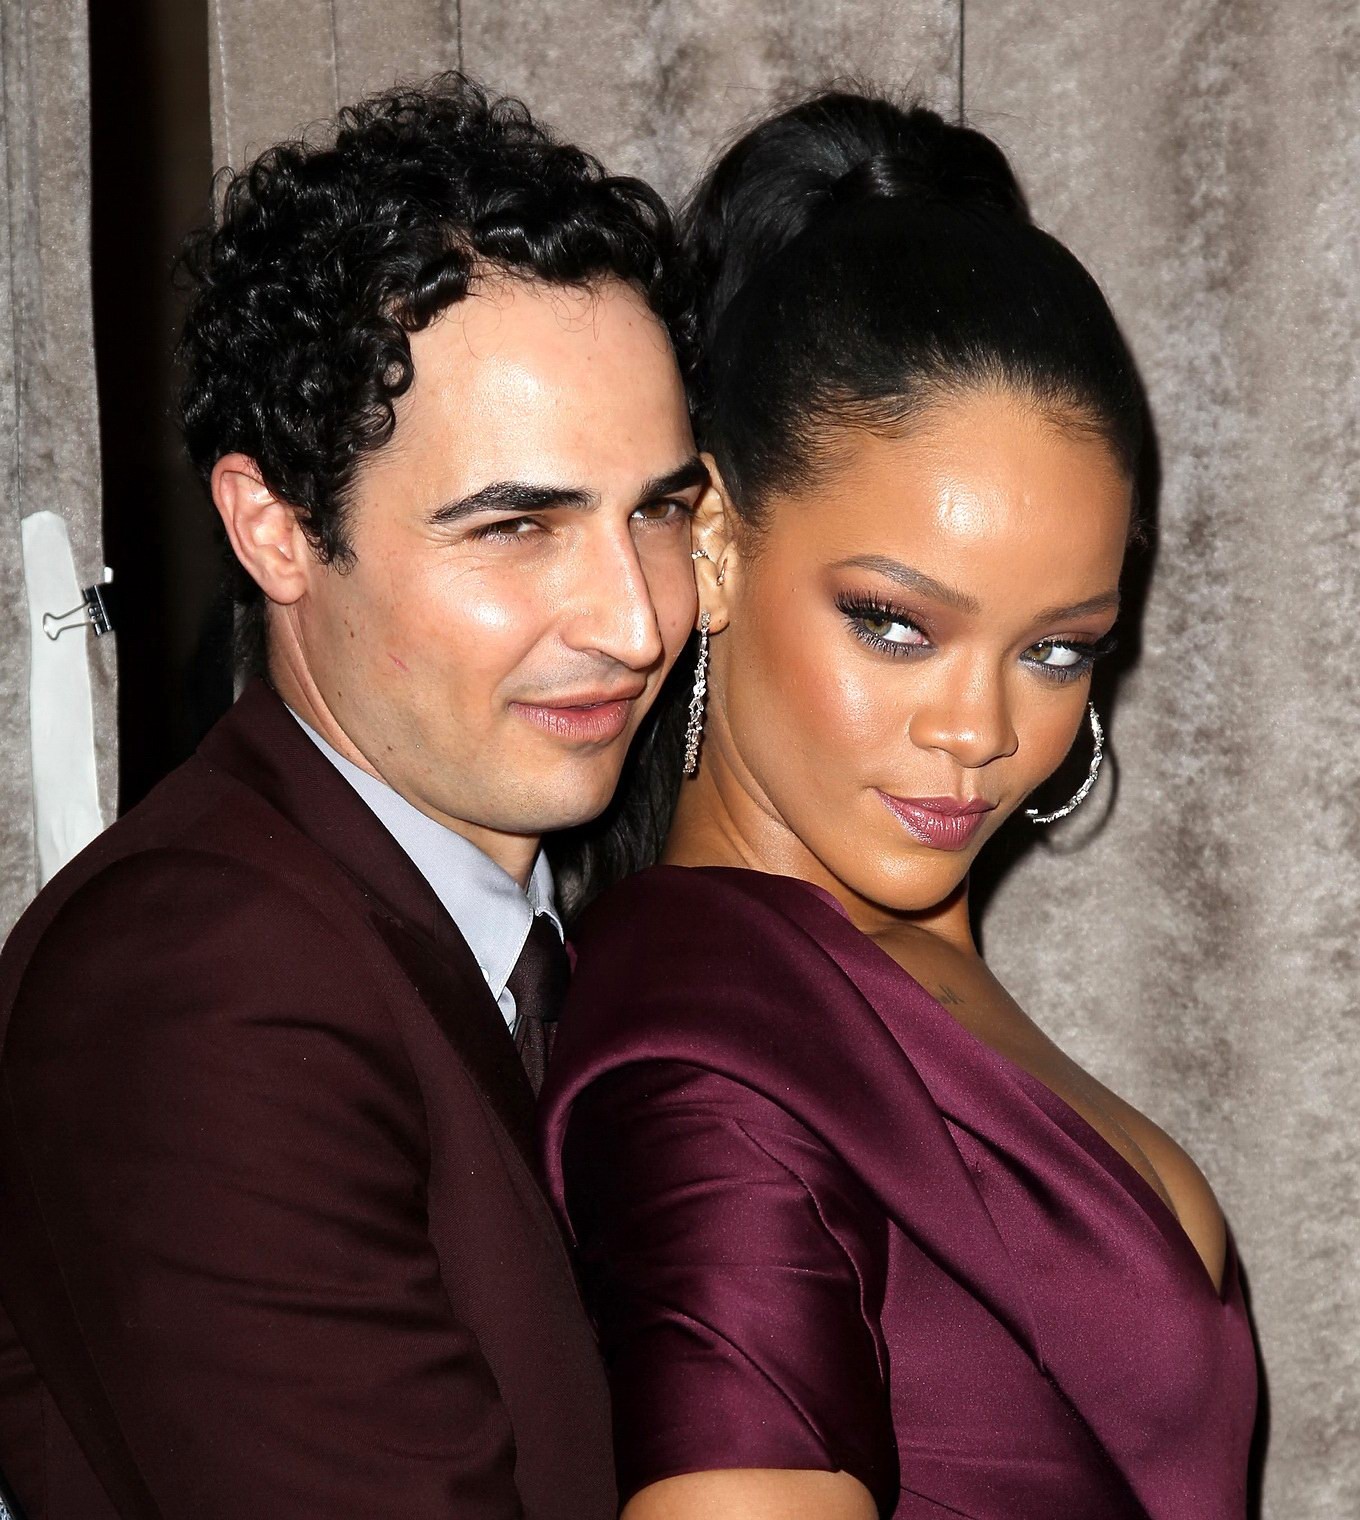 Rihanna showing cleavage and upskirt at the Zac Posen Fashion Show in NYC #75172326